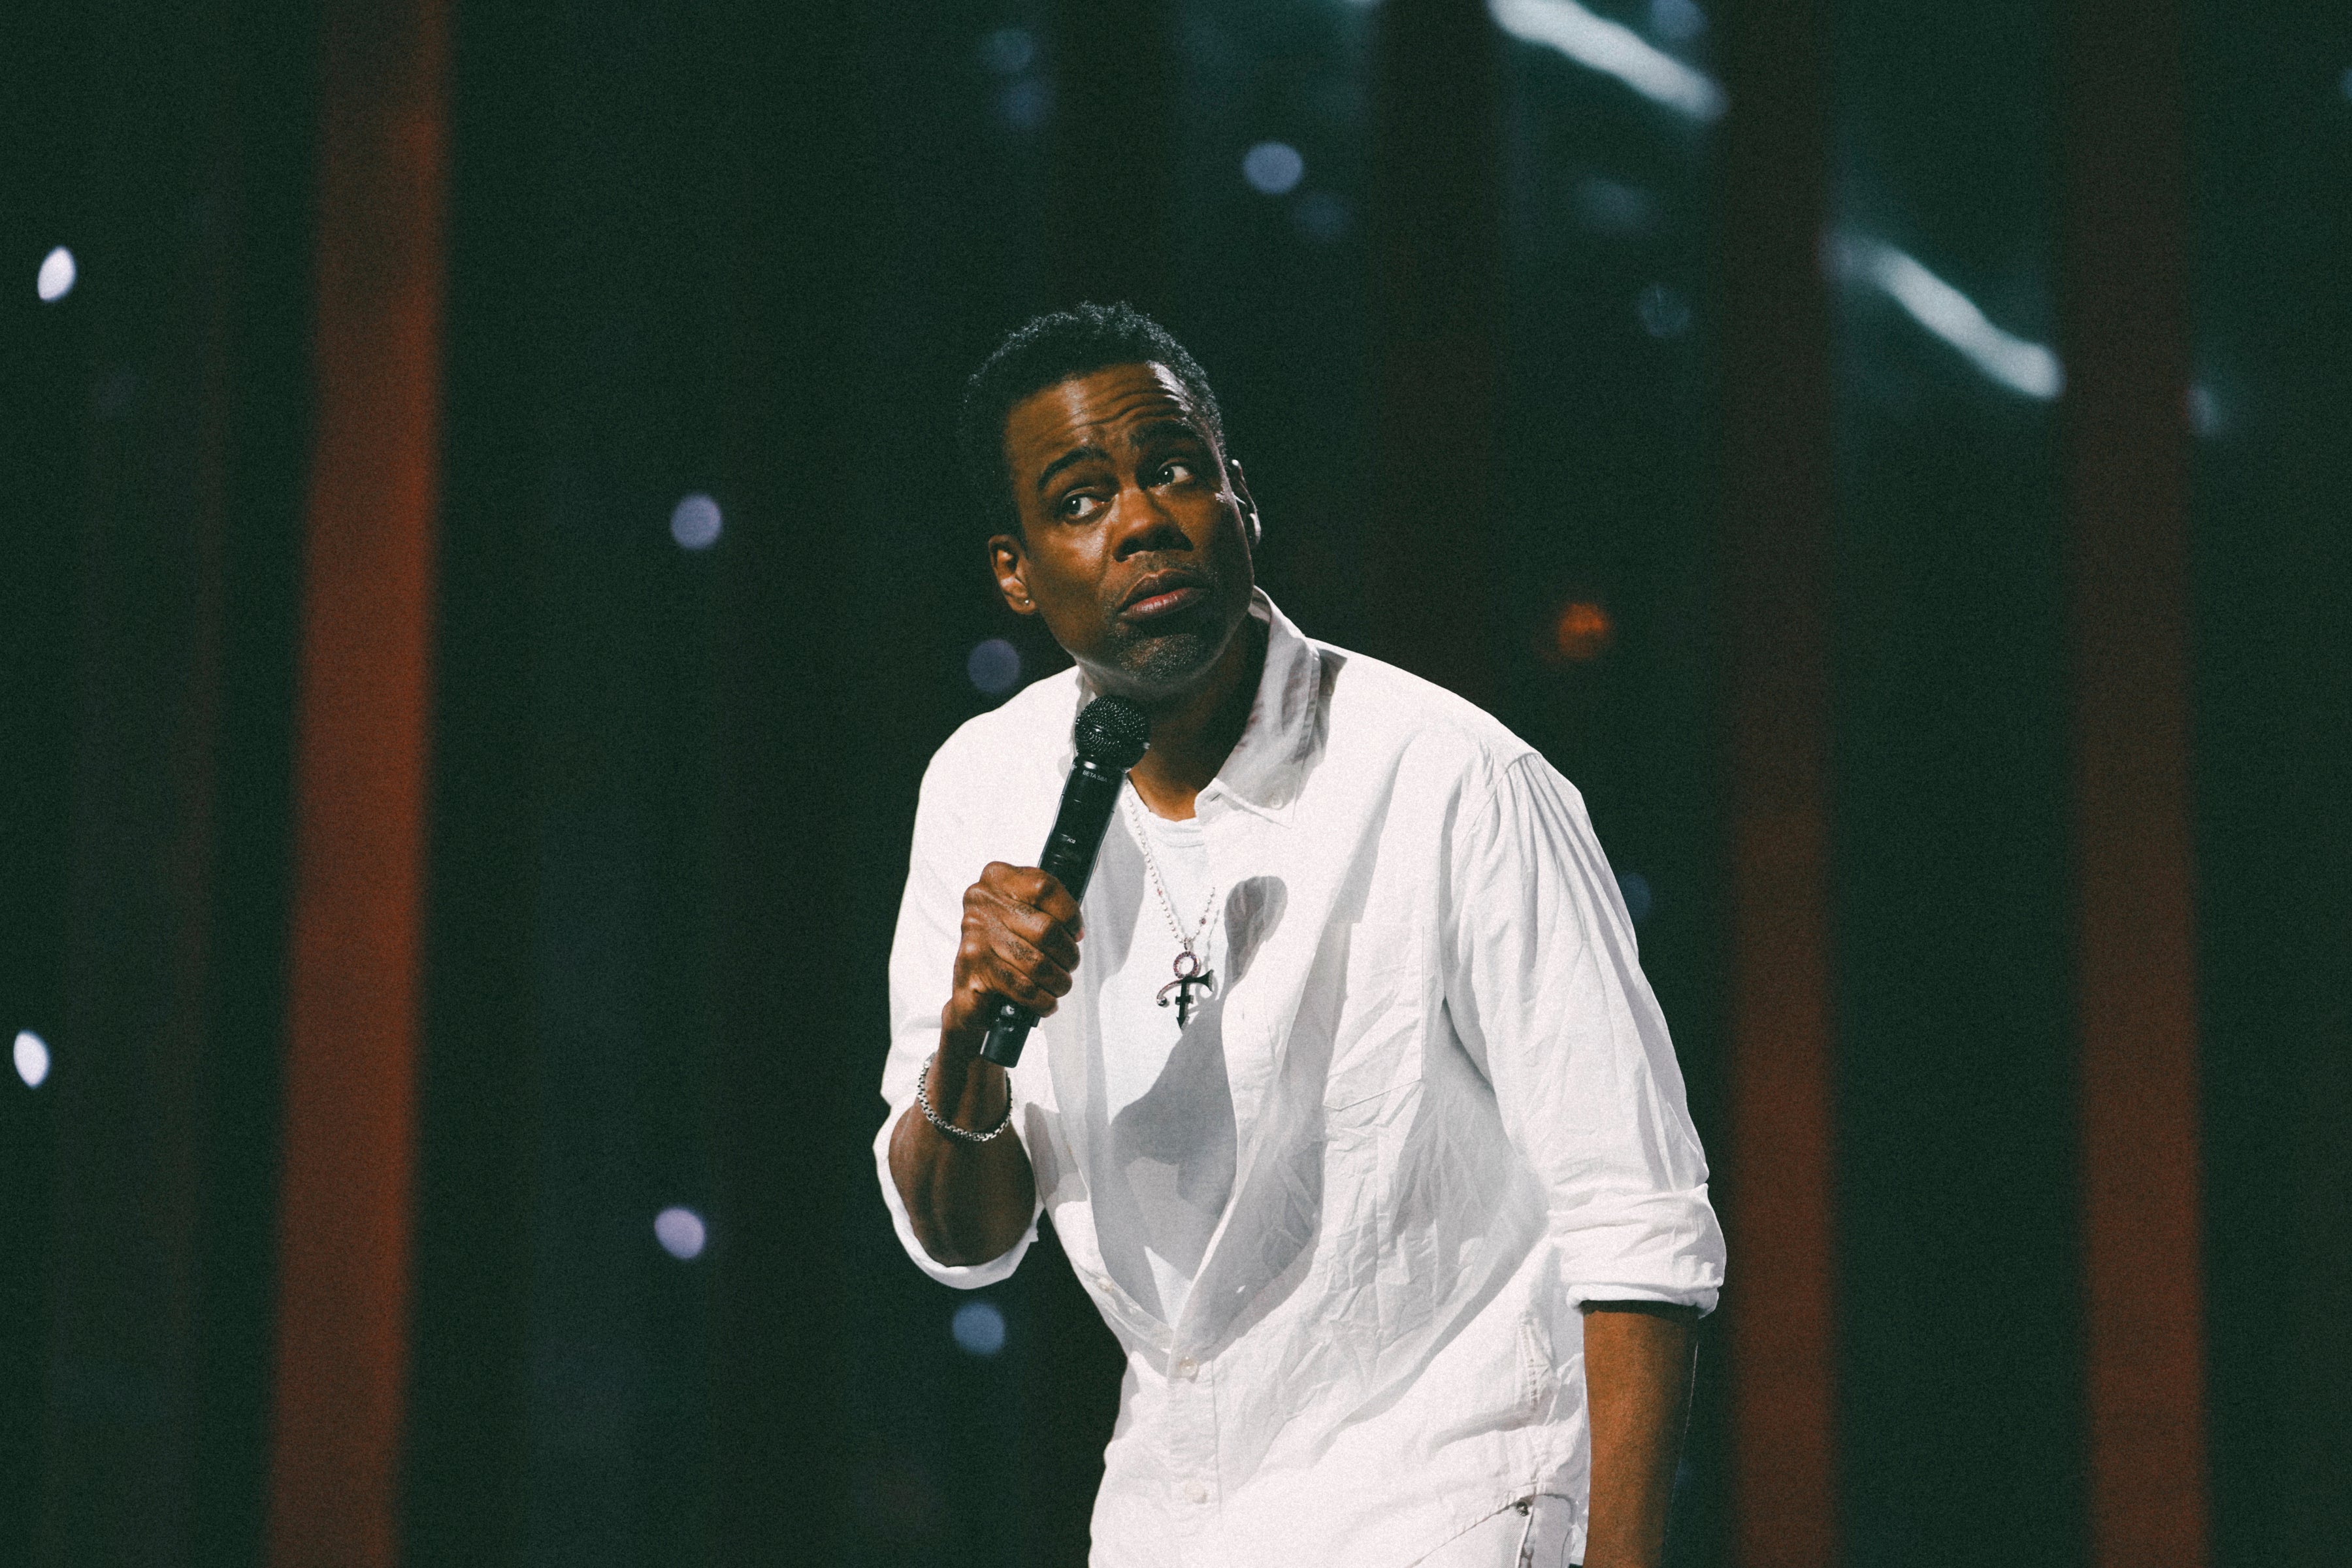 Comedian Chris Rock performs stand-up